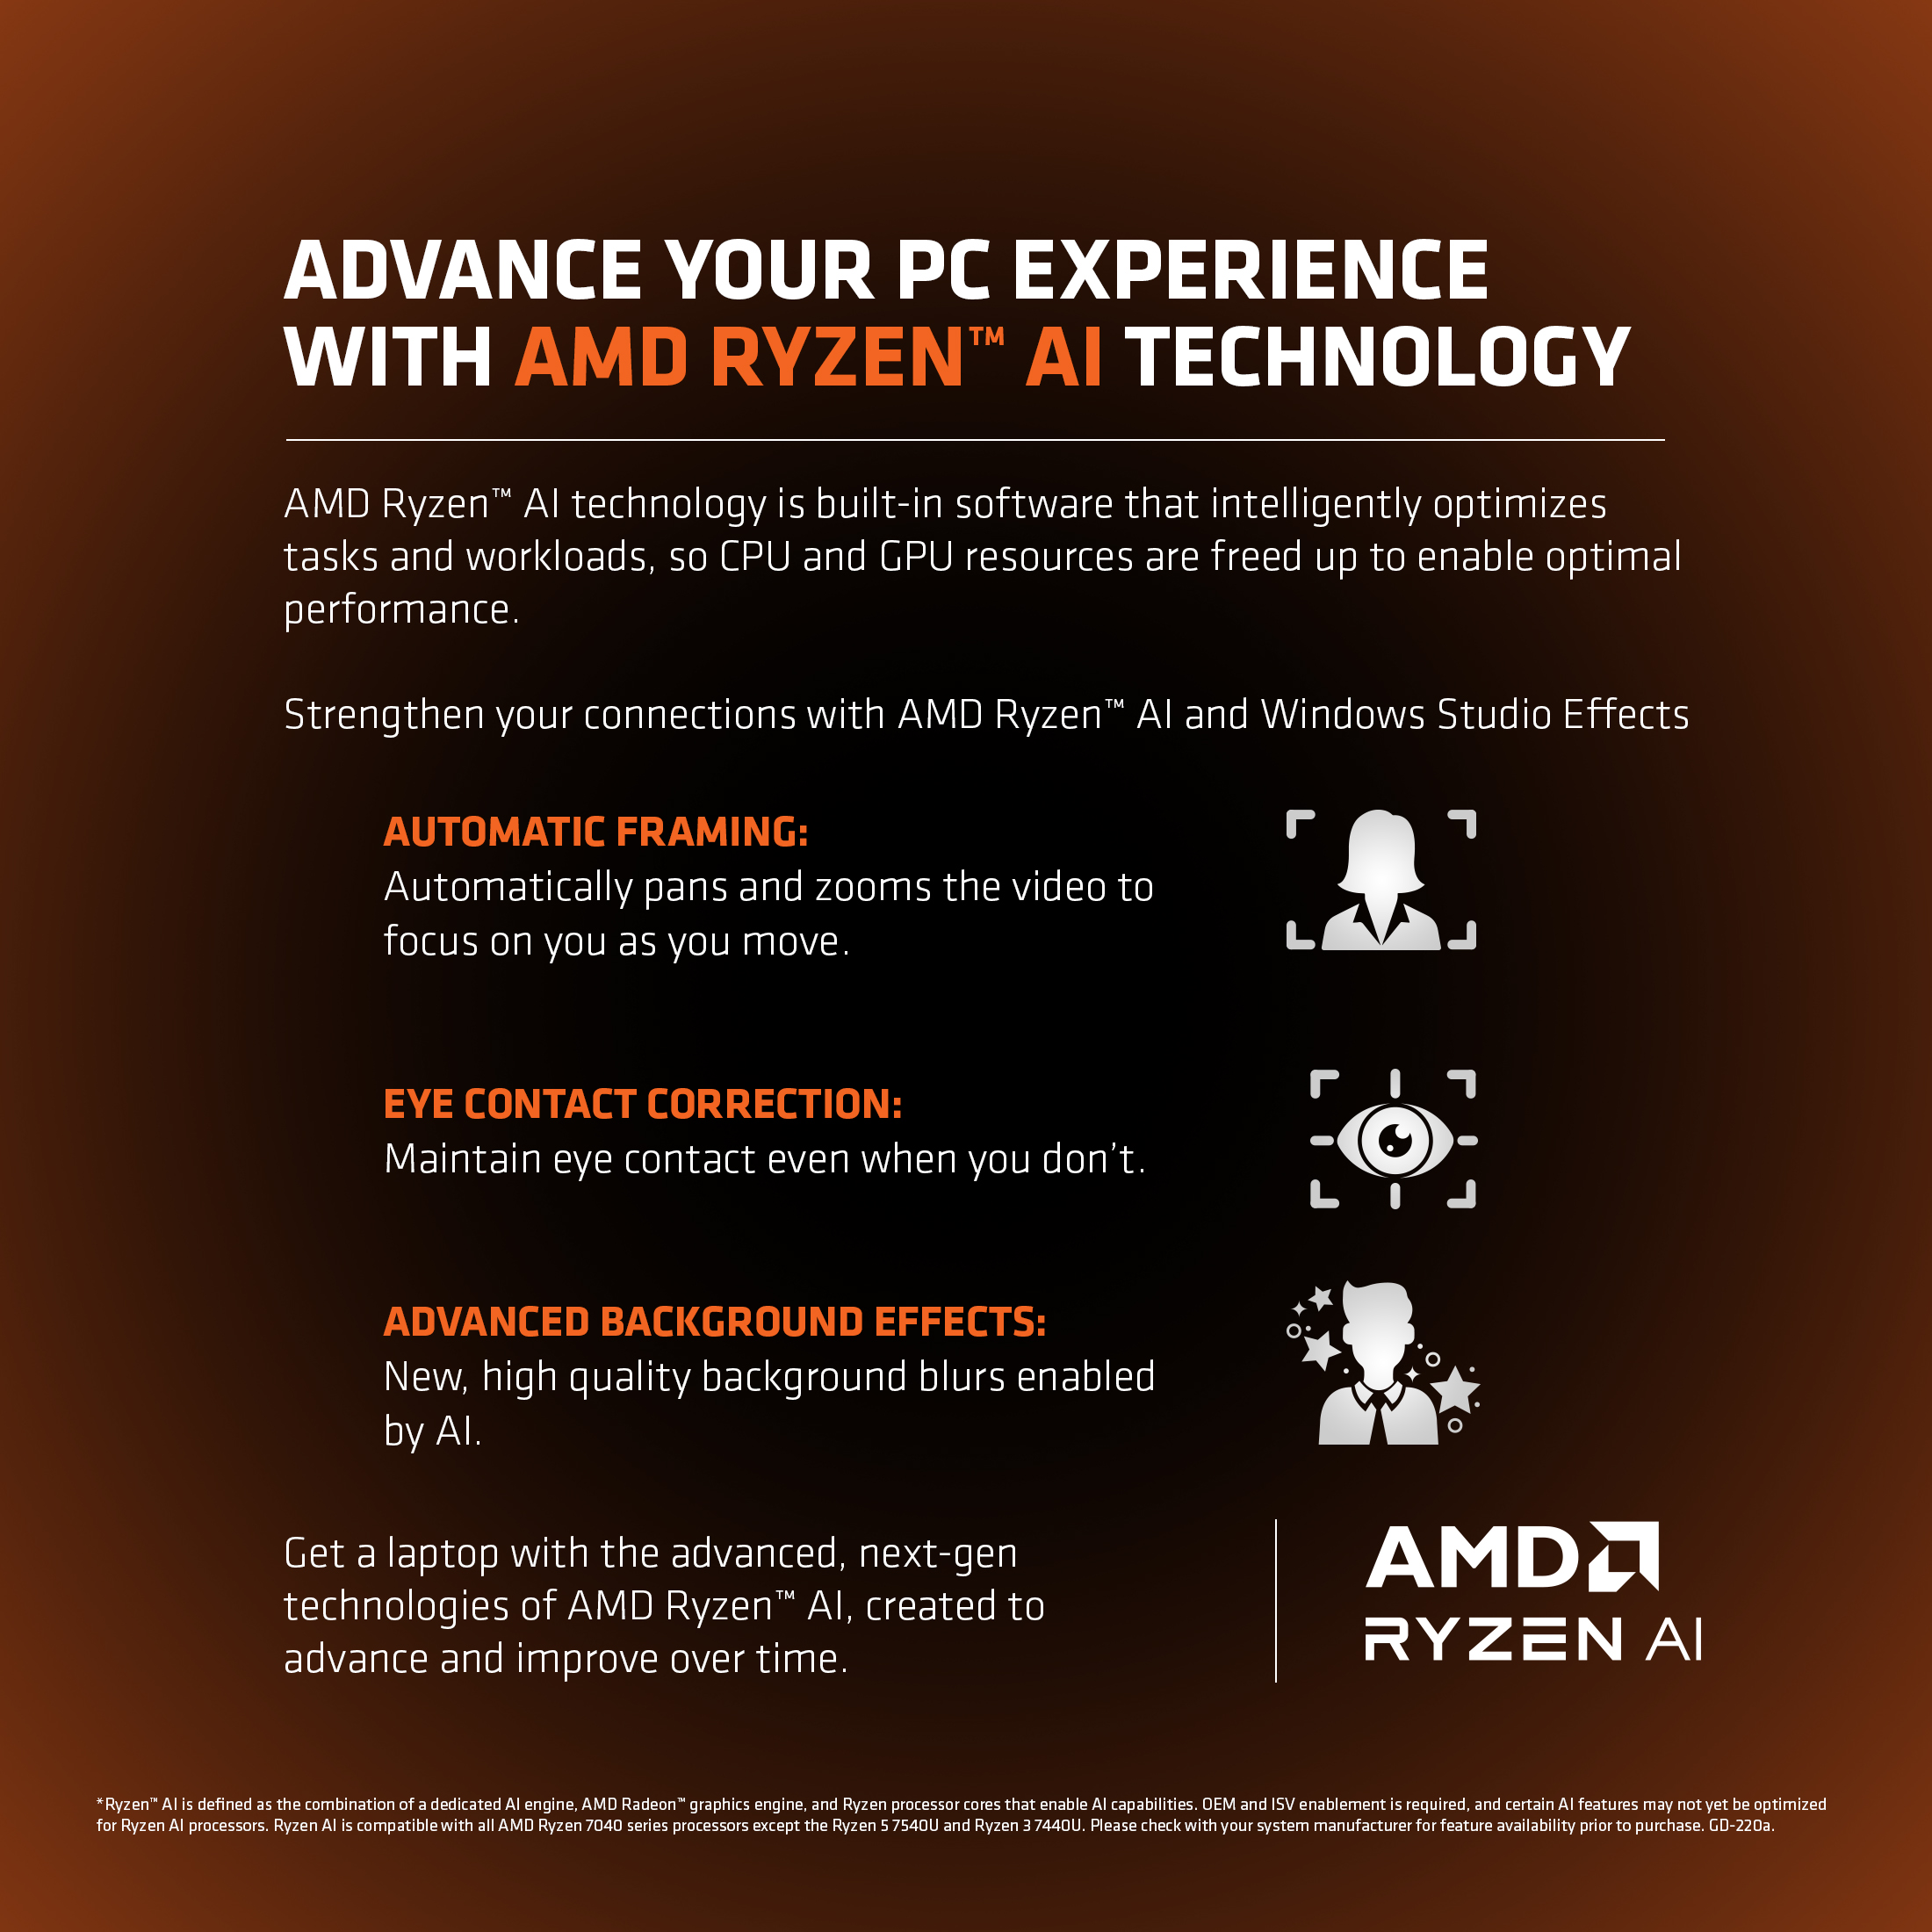 Advance your PC experience with AMD Ryzen AI technology